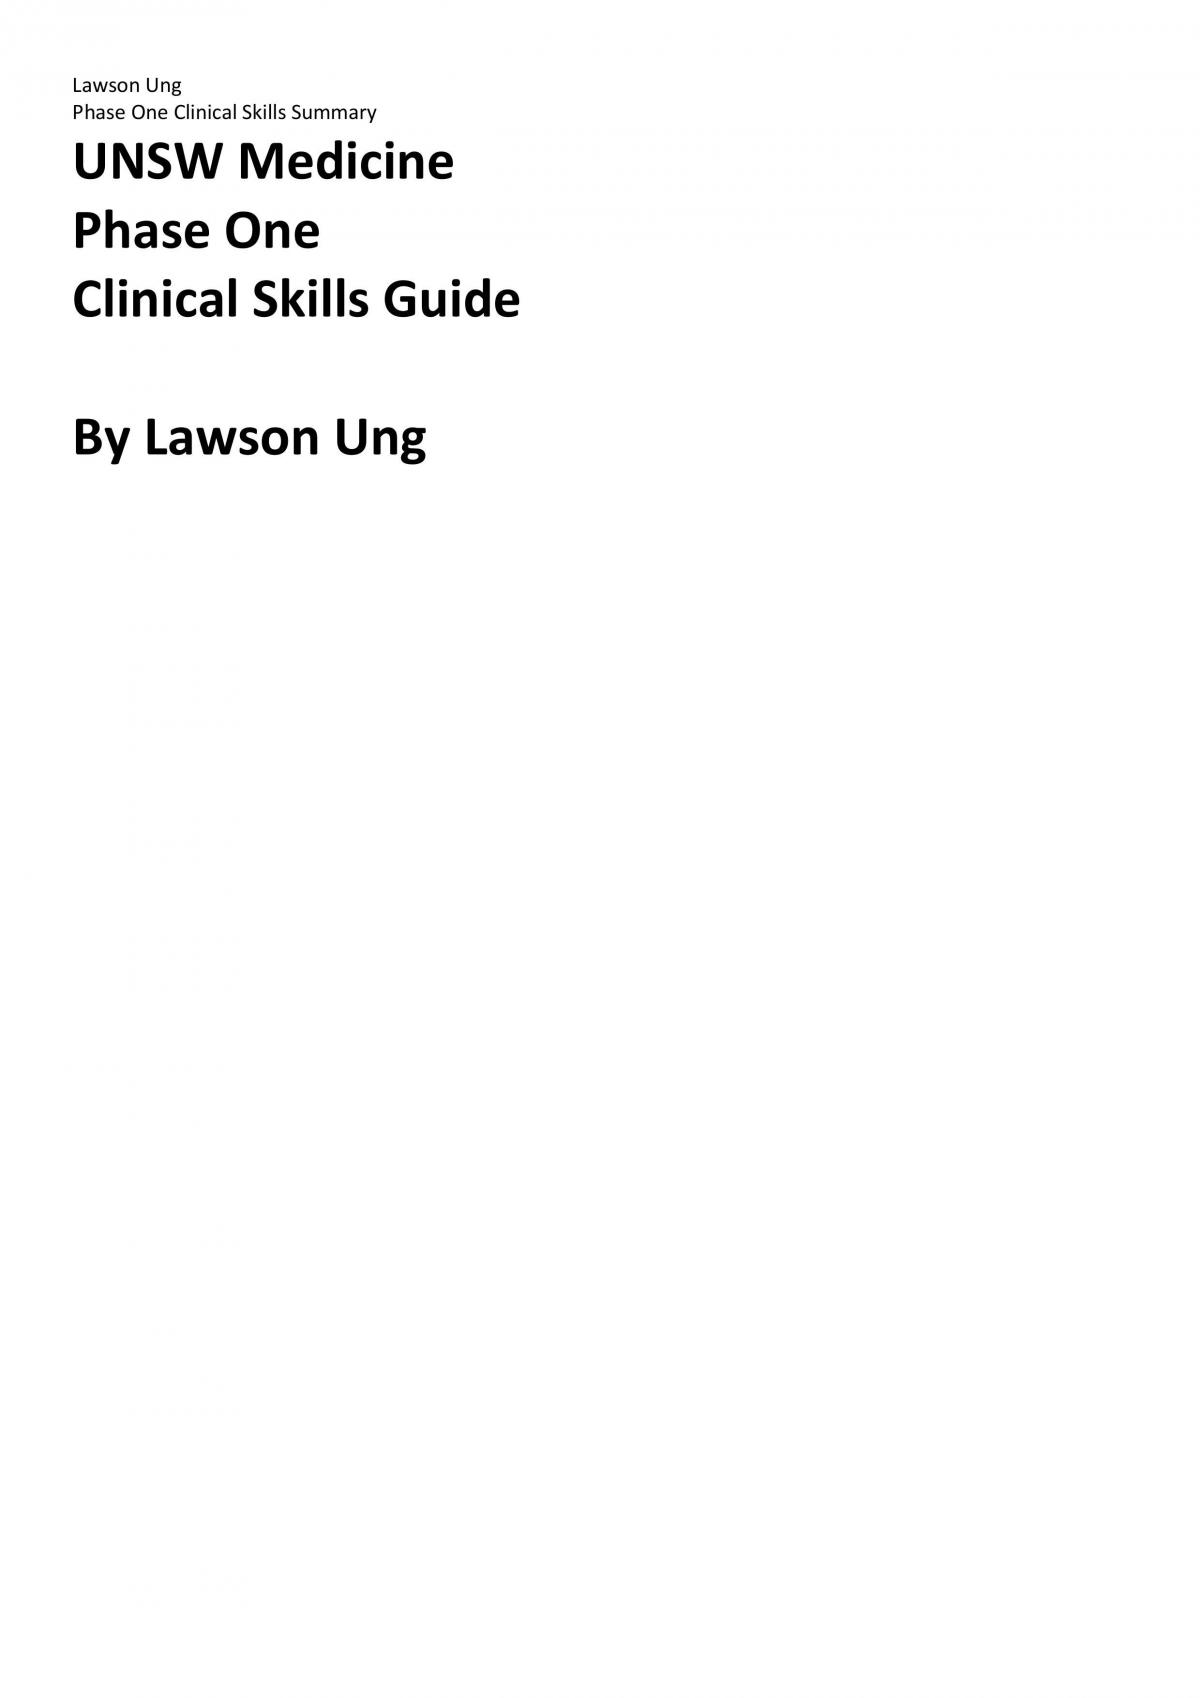 Phase 1 Clinical Skills Guide - Page 1